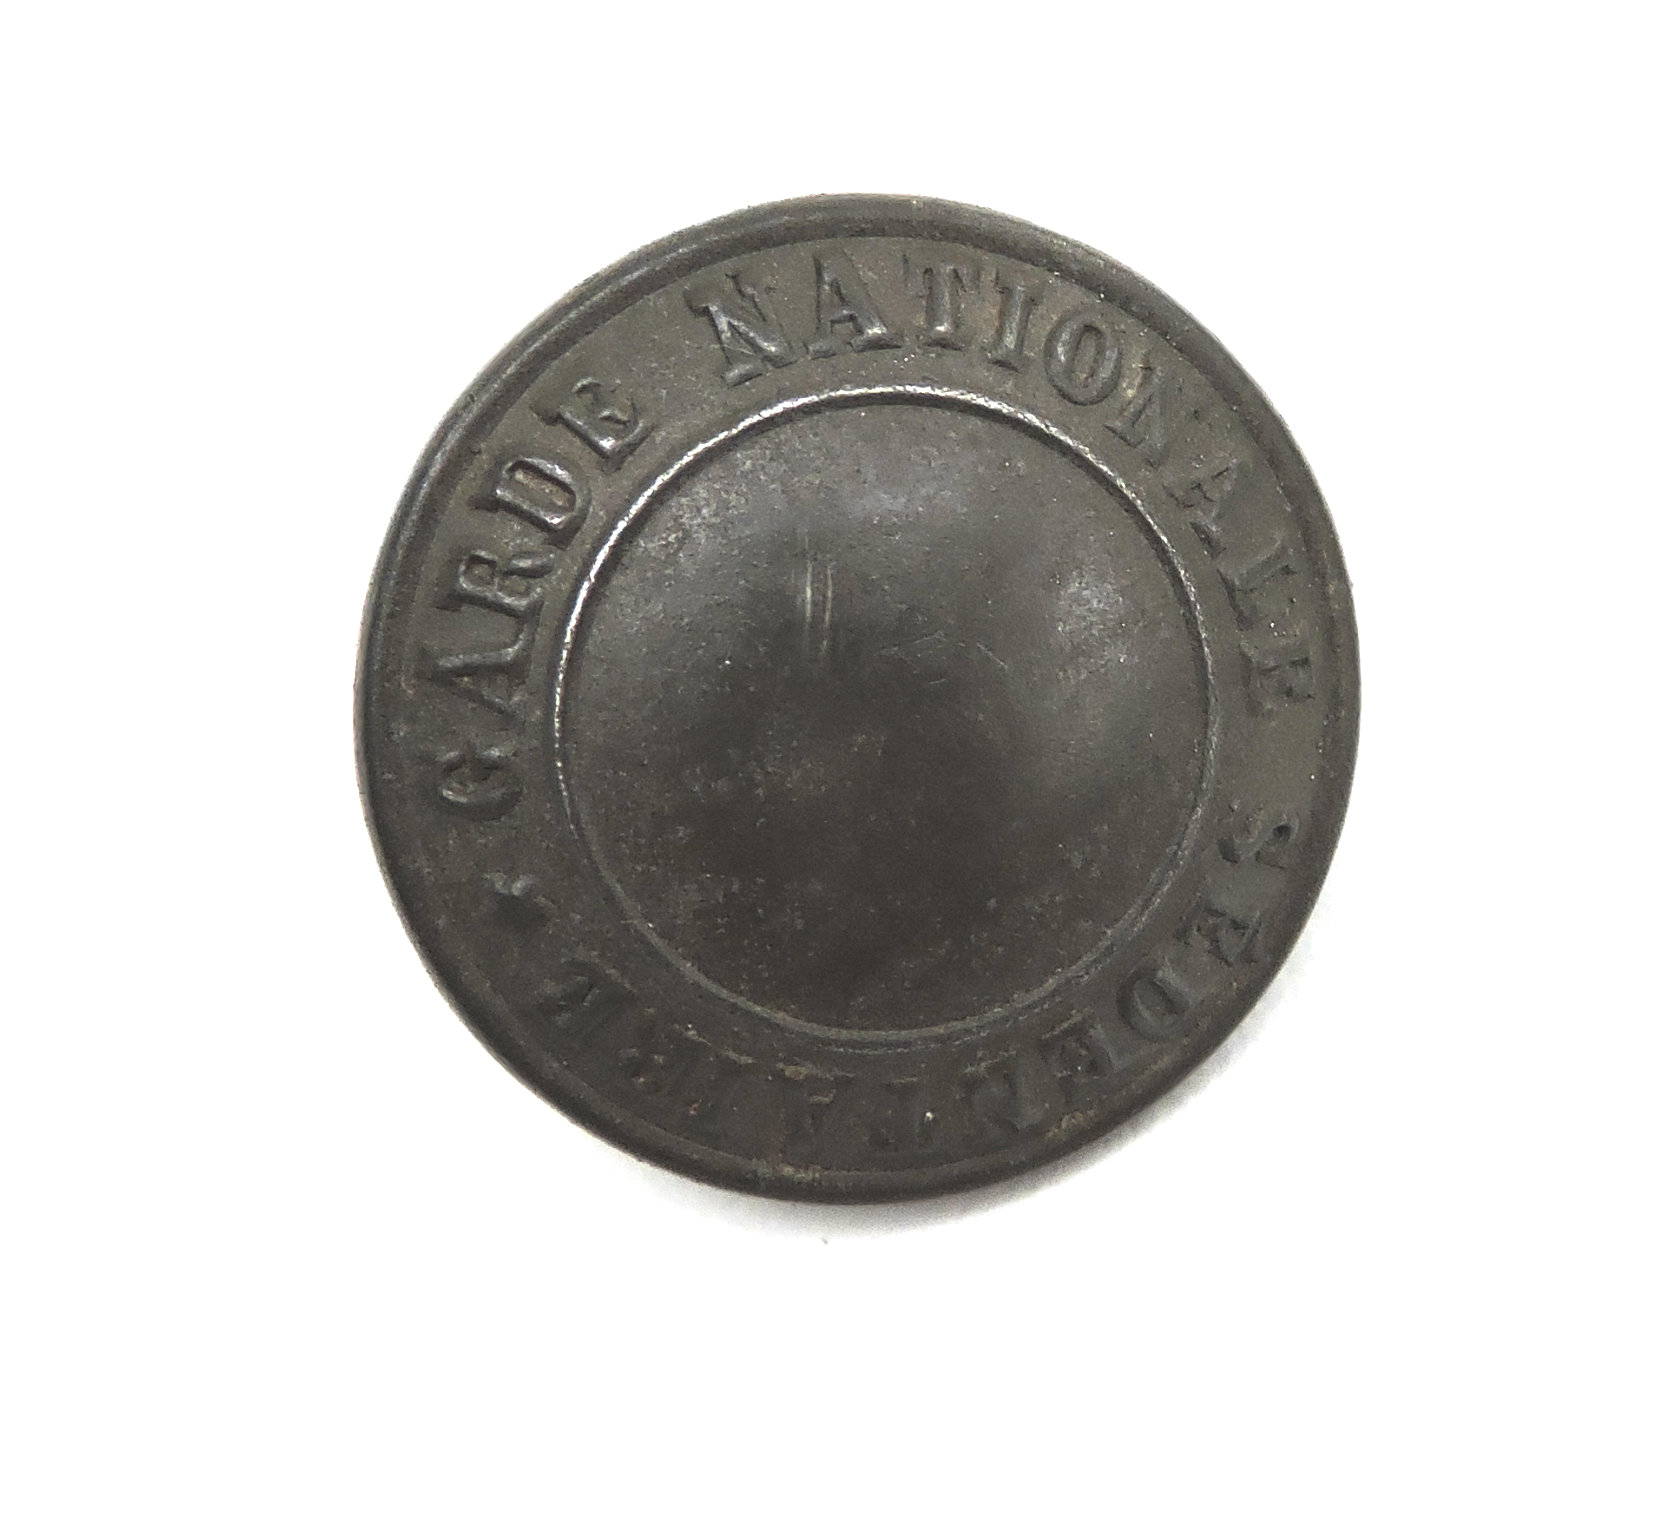 1871-17 mm BOUTON GARDE NATIONALE SEDENTAIRE 1870 